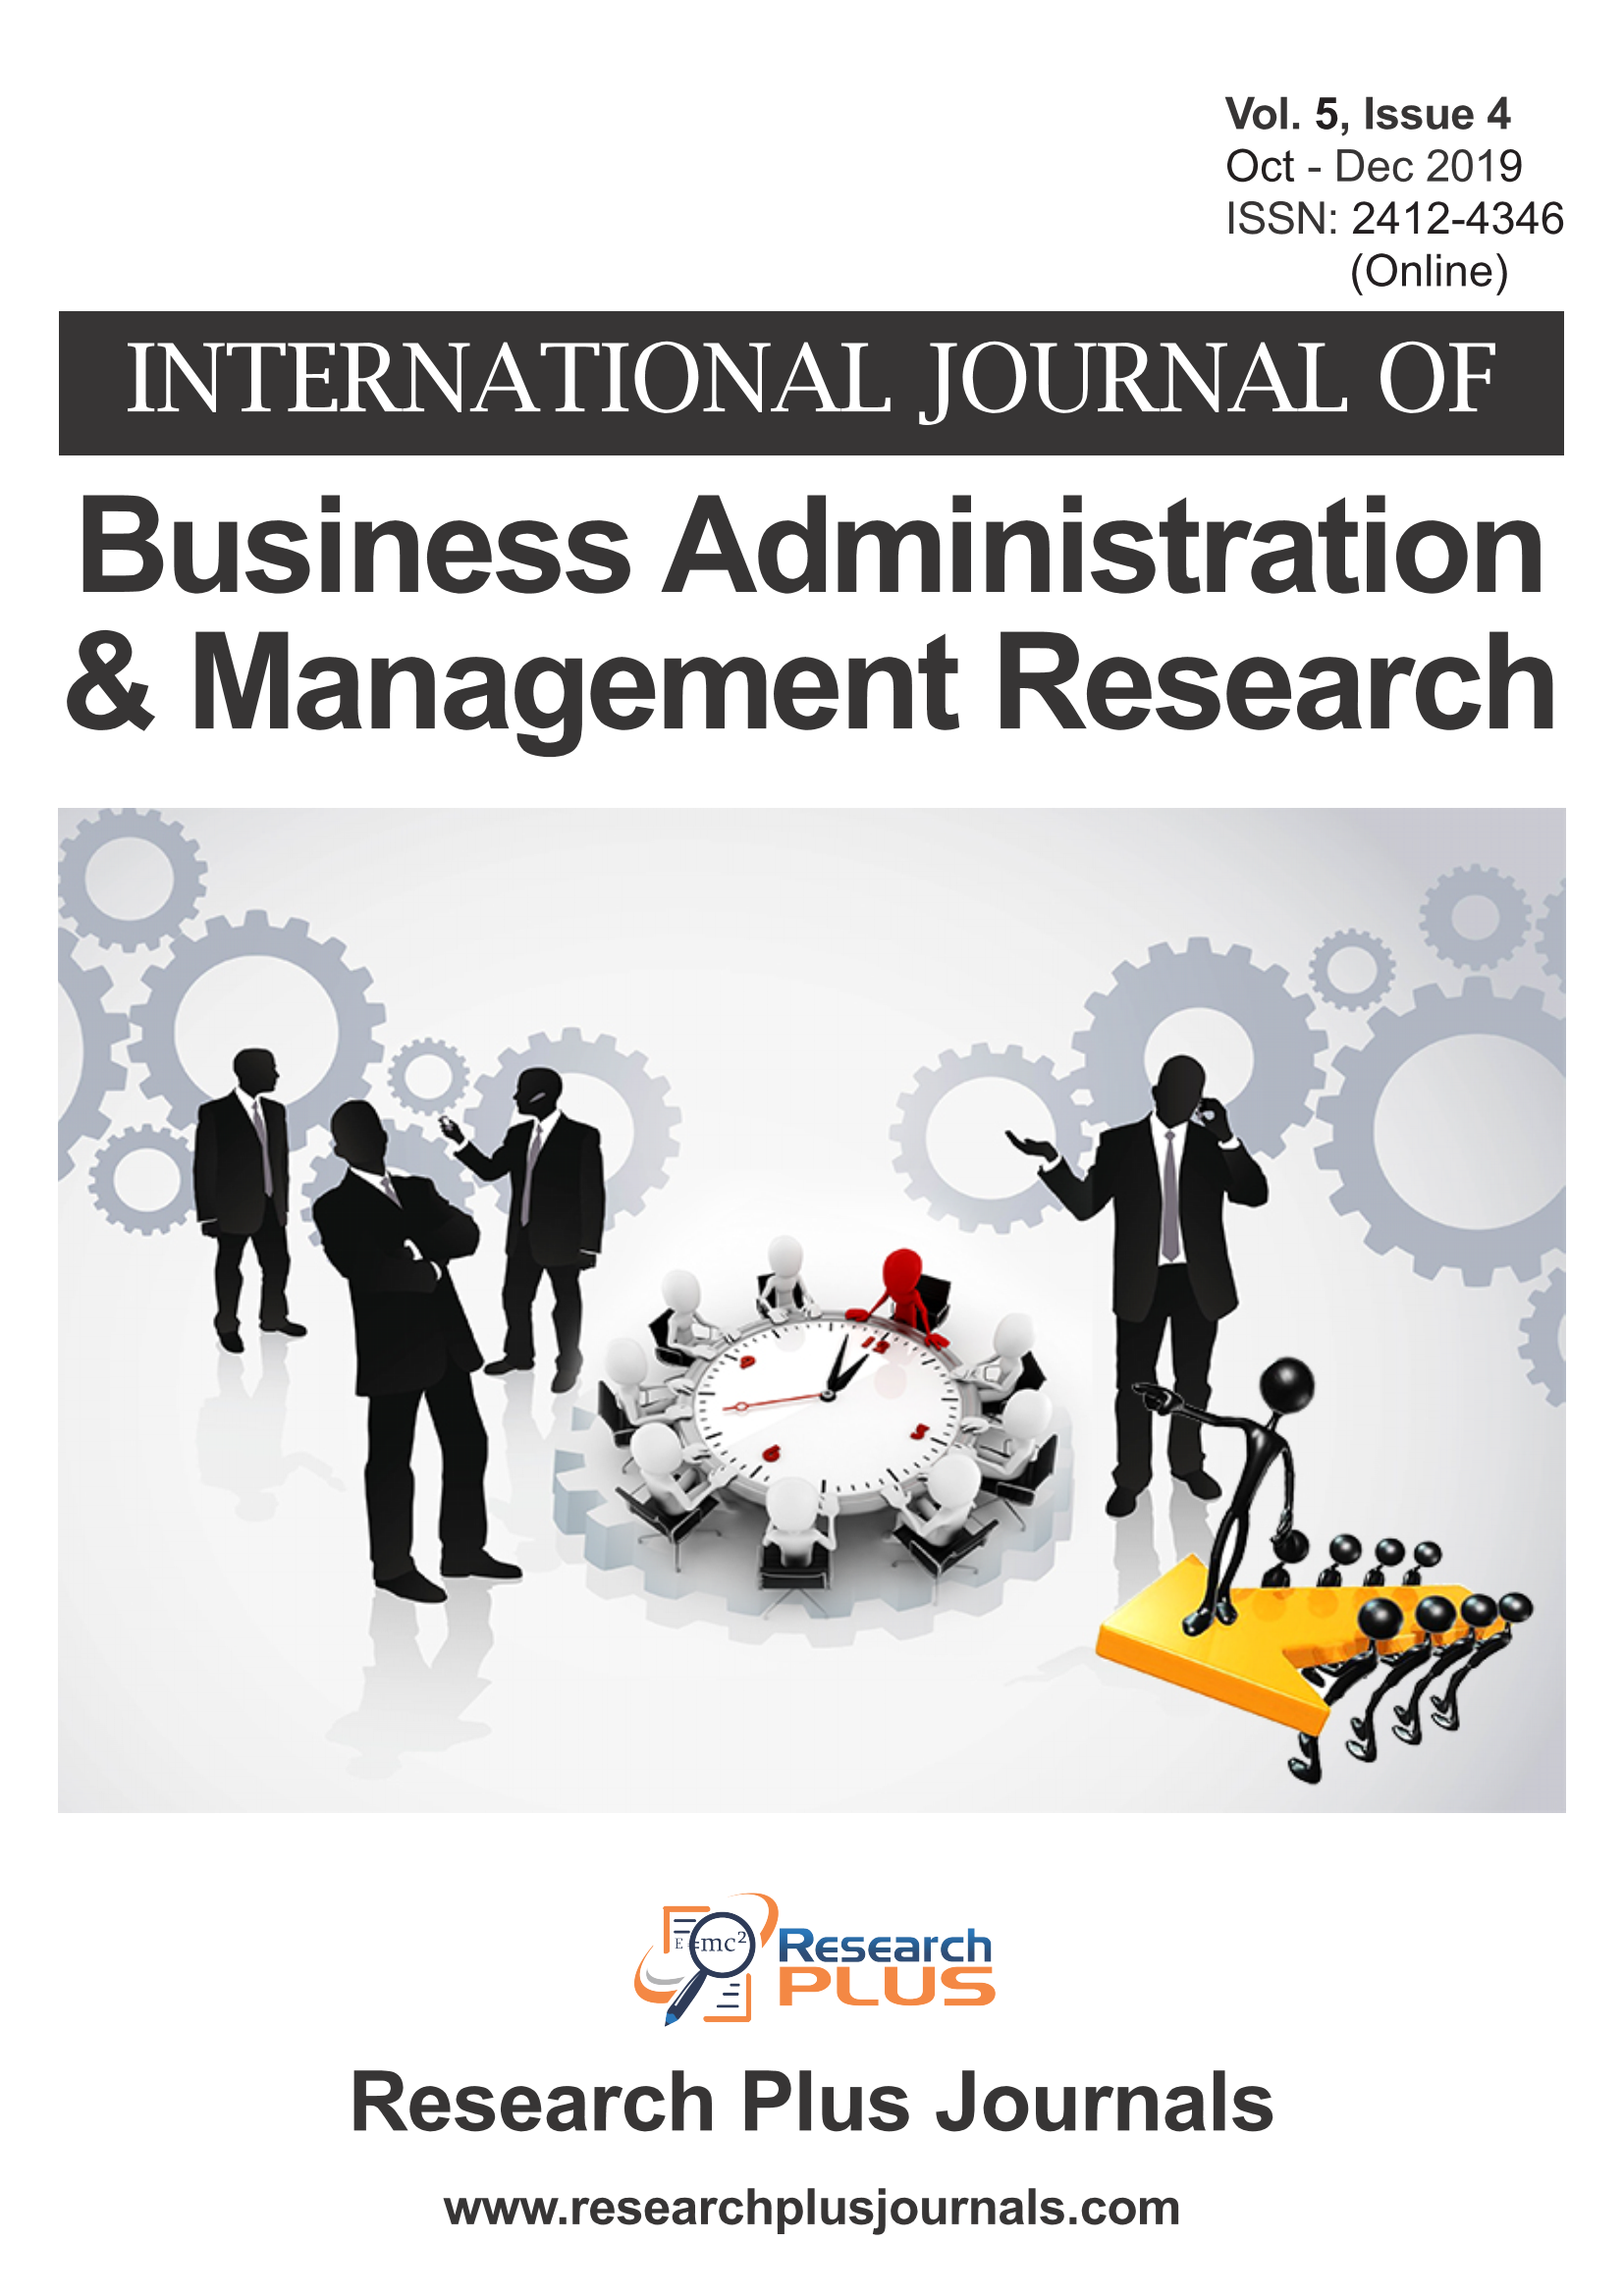 Volume 5, Issue 4, International Journal of Business Administration and Management Research (IJBAMR) (Online ISSN: 2412-4346)